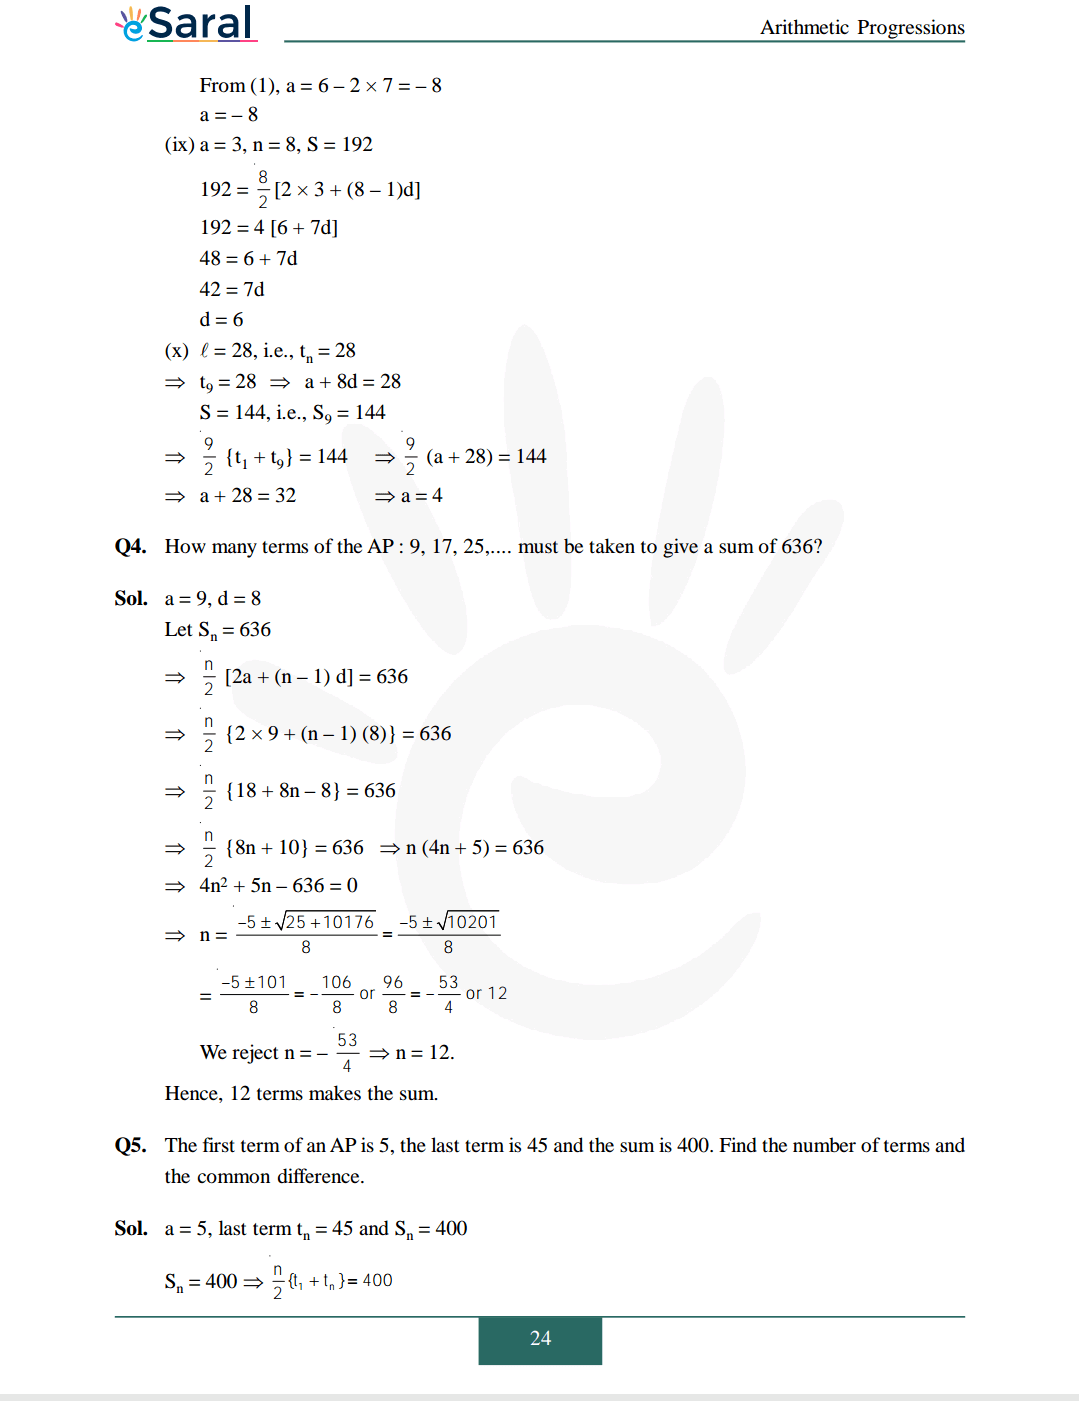 Class 10 Maths Chapter 5 exercise 5.3 solutions Image 7